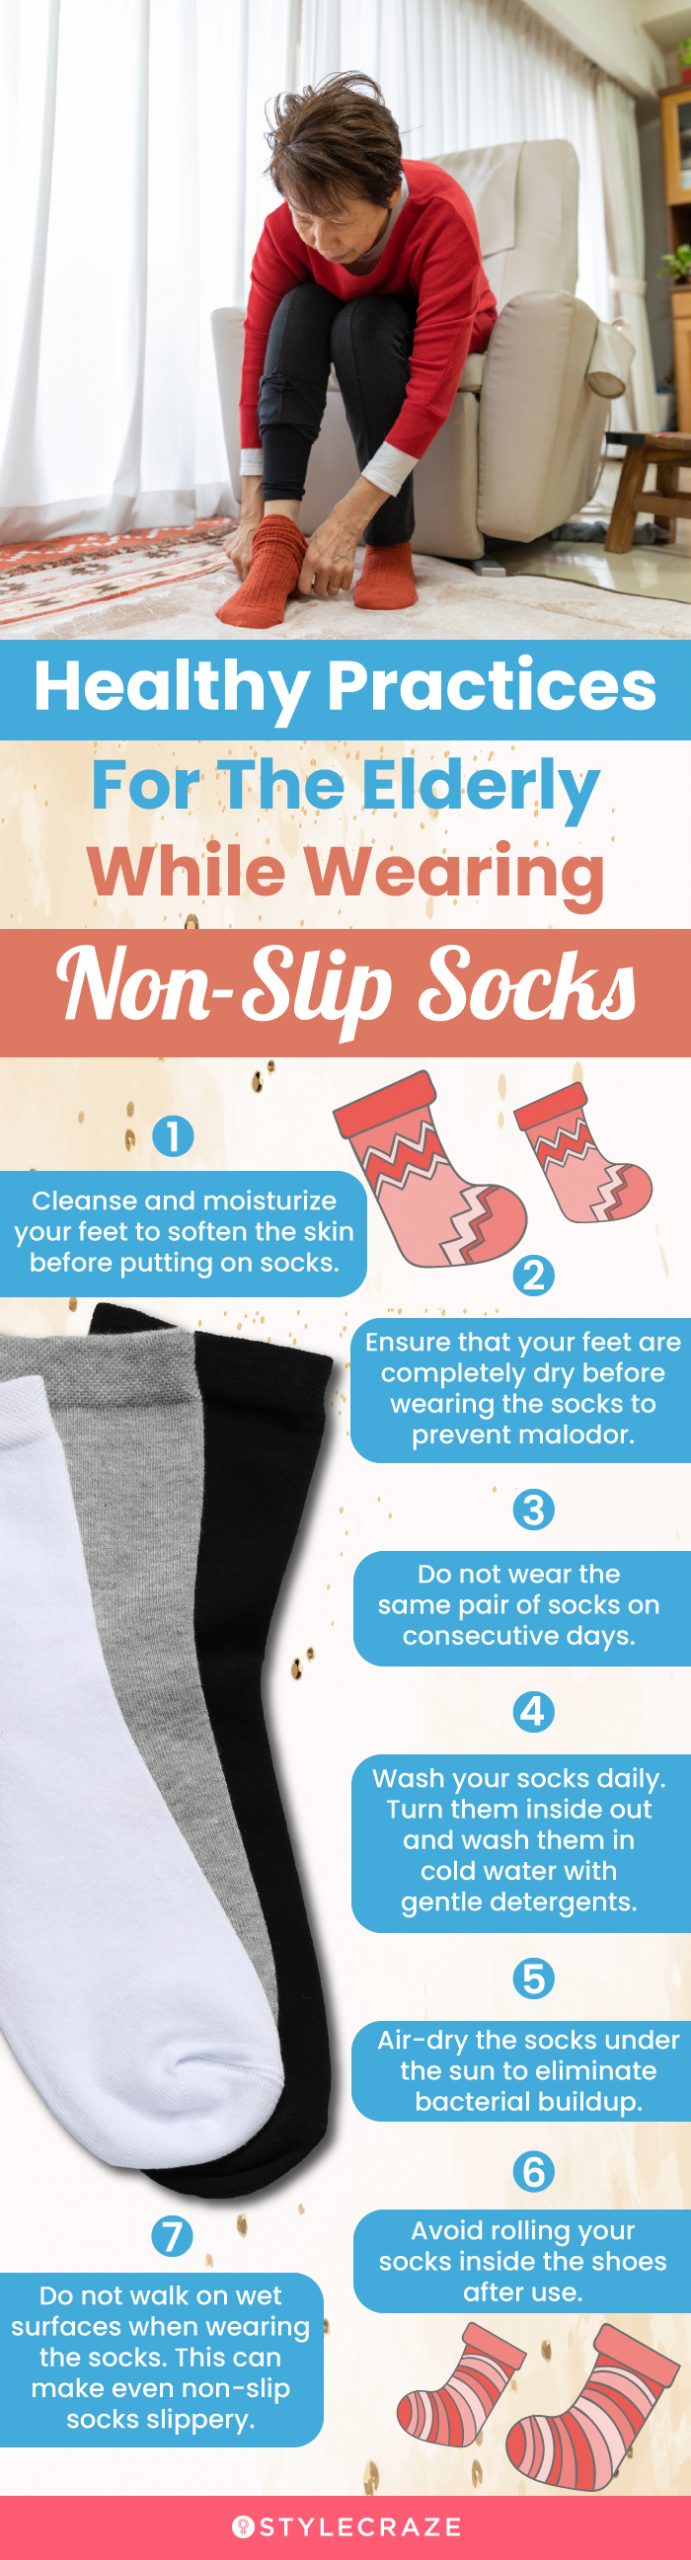 Healthy Practices For The Elderly While Wearing Non-Slip Socks (infographic)